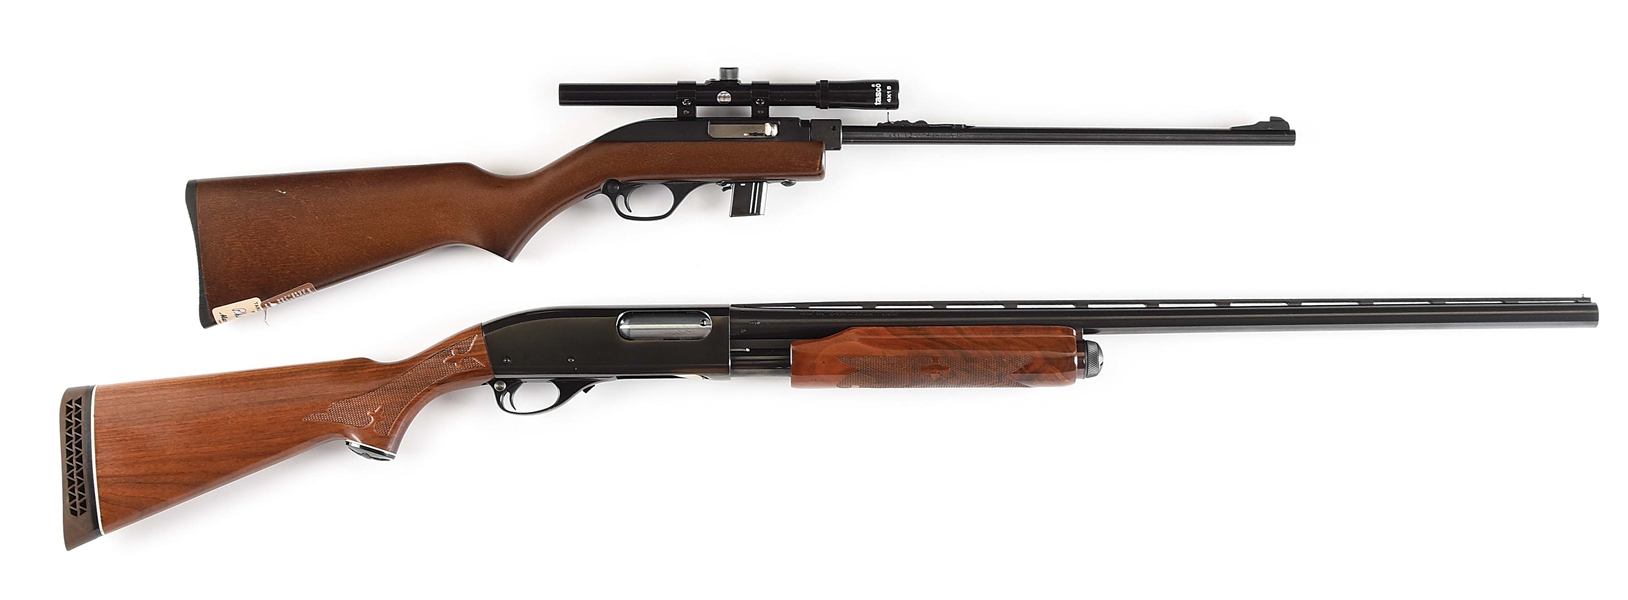 (M) LOT OF 2: ONE REMINGTON 870 WINGMASTER PUMP ACTION SHOTGUN AND ONE MARLIN MODEL 70P SEMI-AUTOMATIC RIFLE